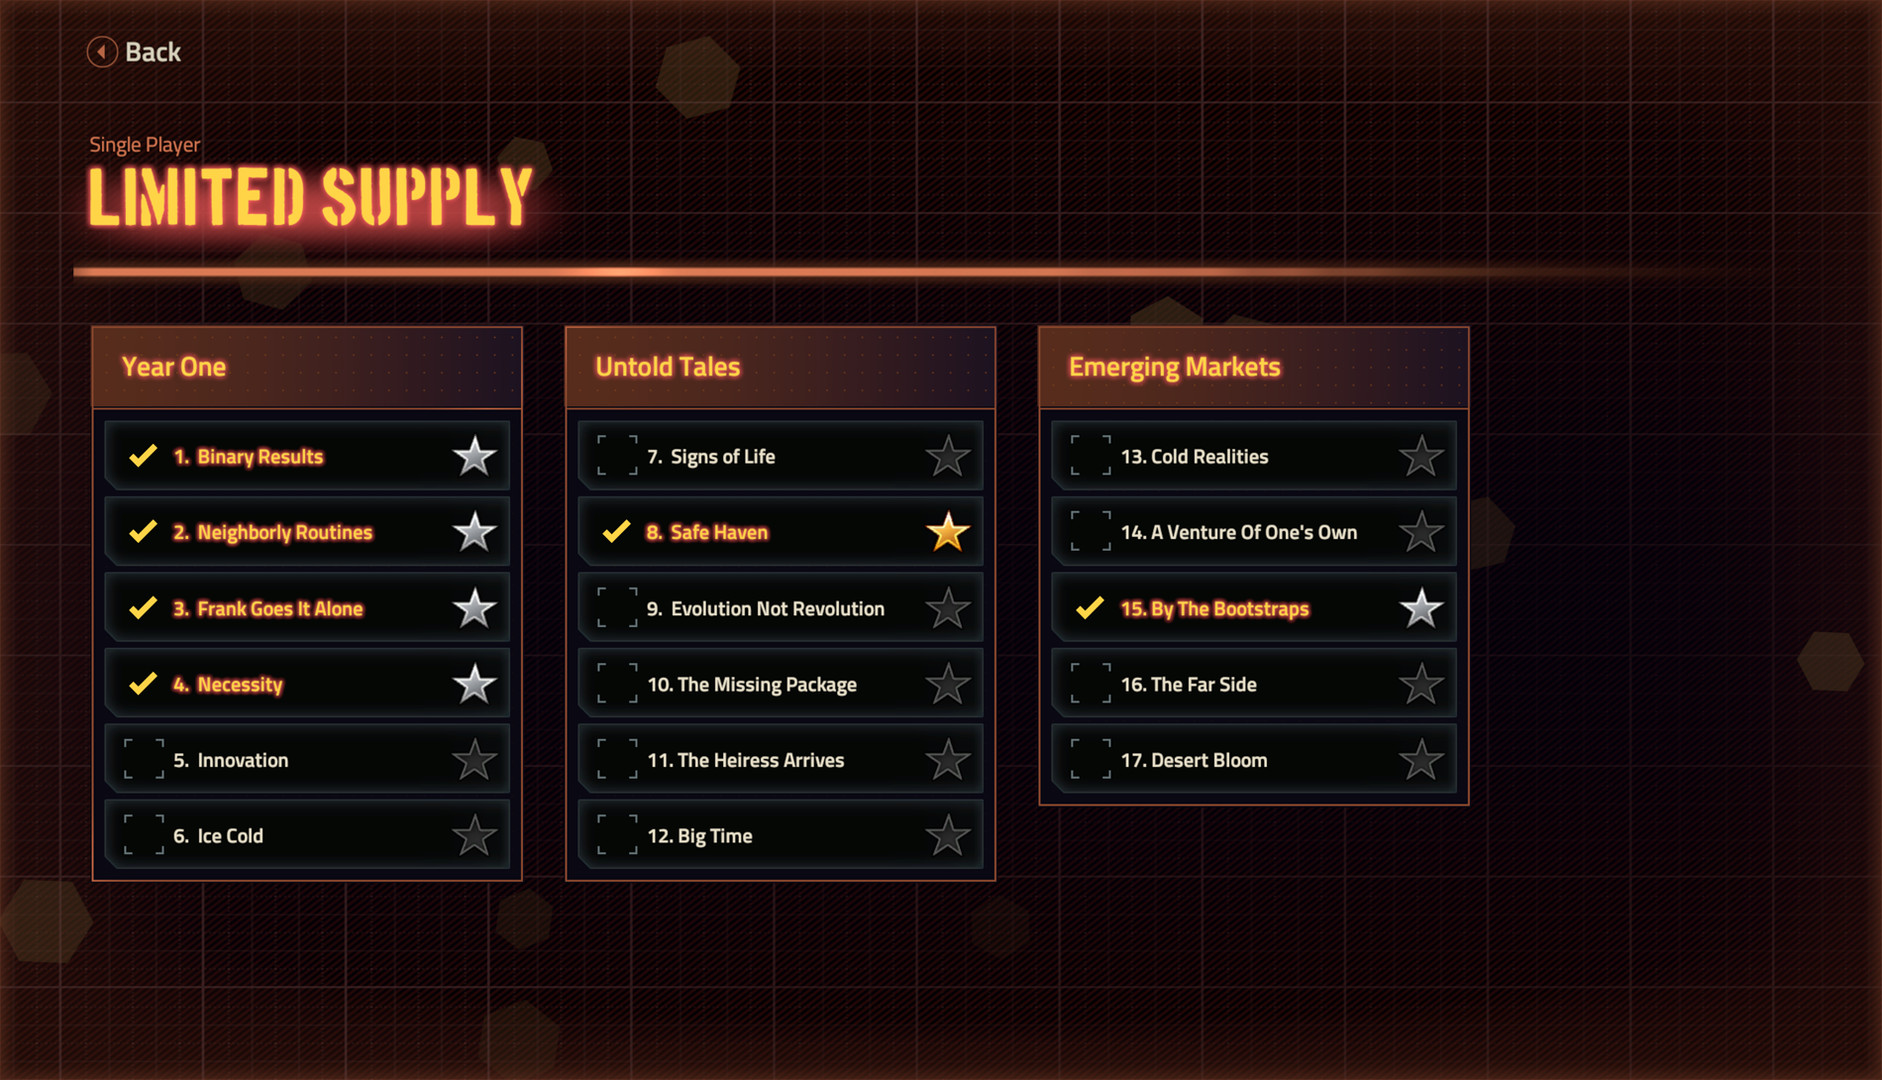 Offworld Trading Company - Limited Supply DLC Featured Screenshot #1